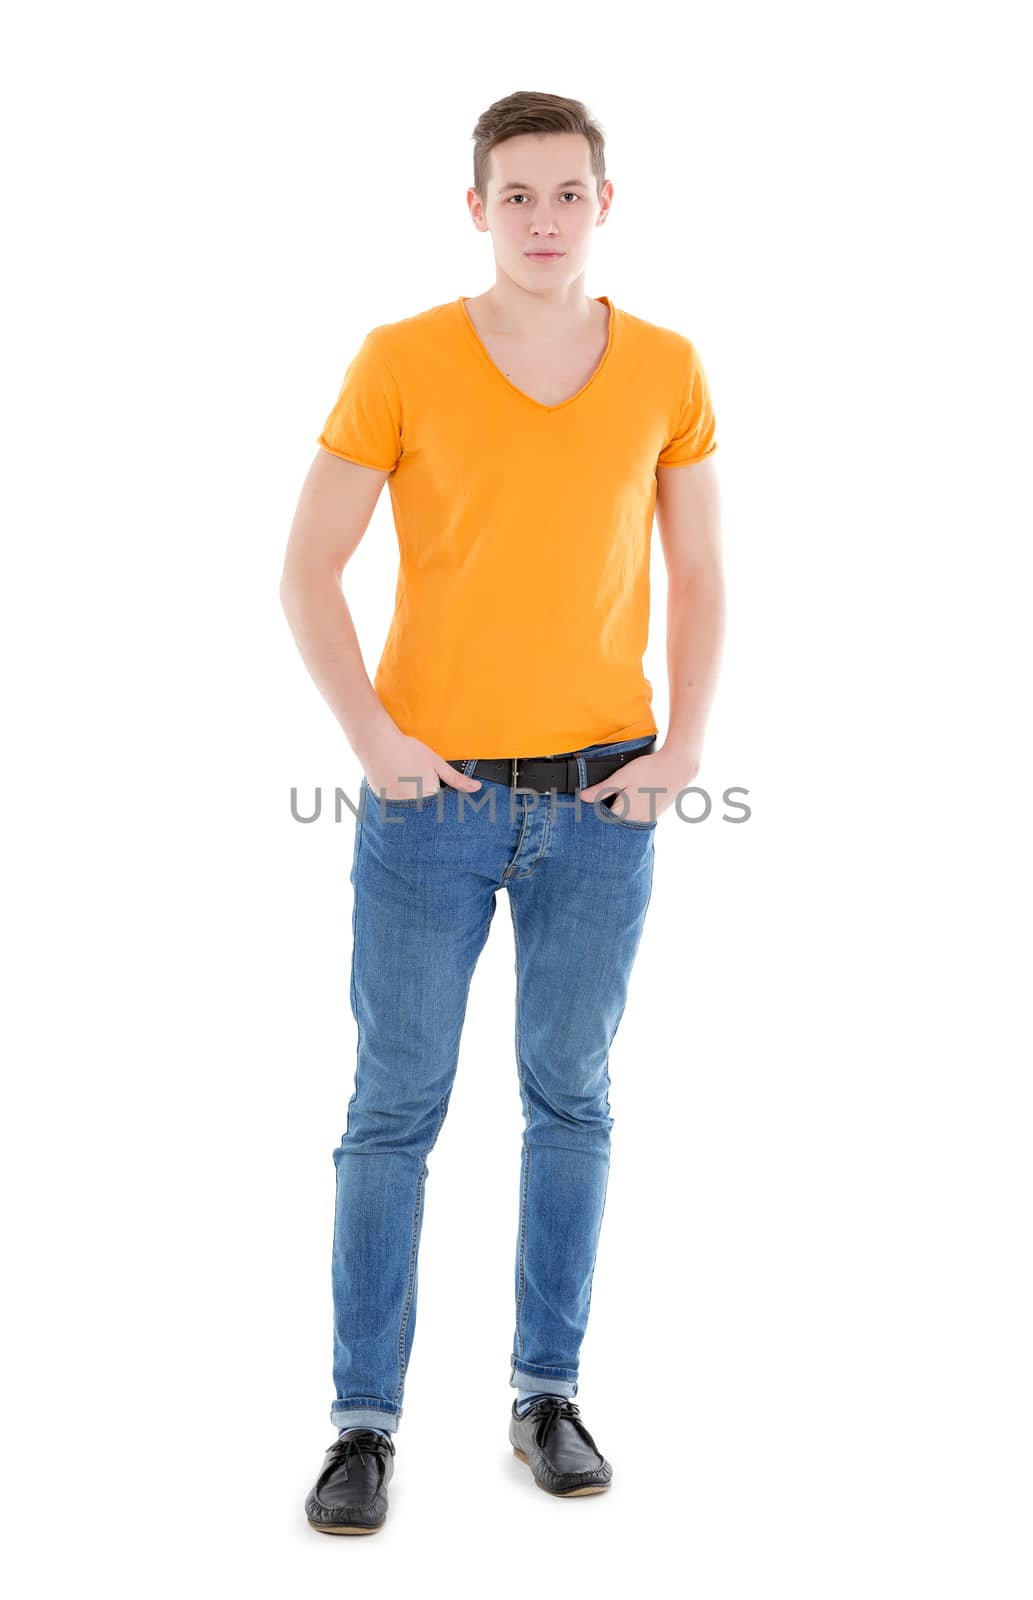 Young man, wearing a yellow T-shirt and slim jeans, standing on white background